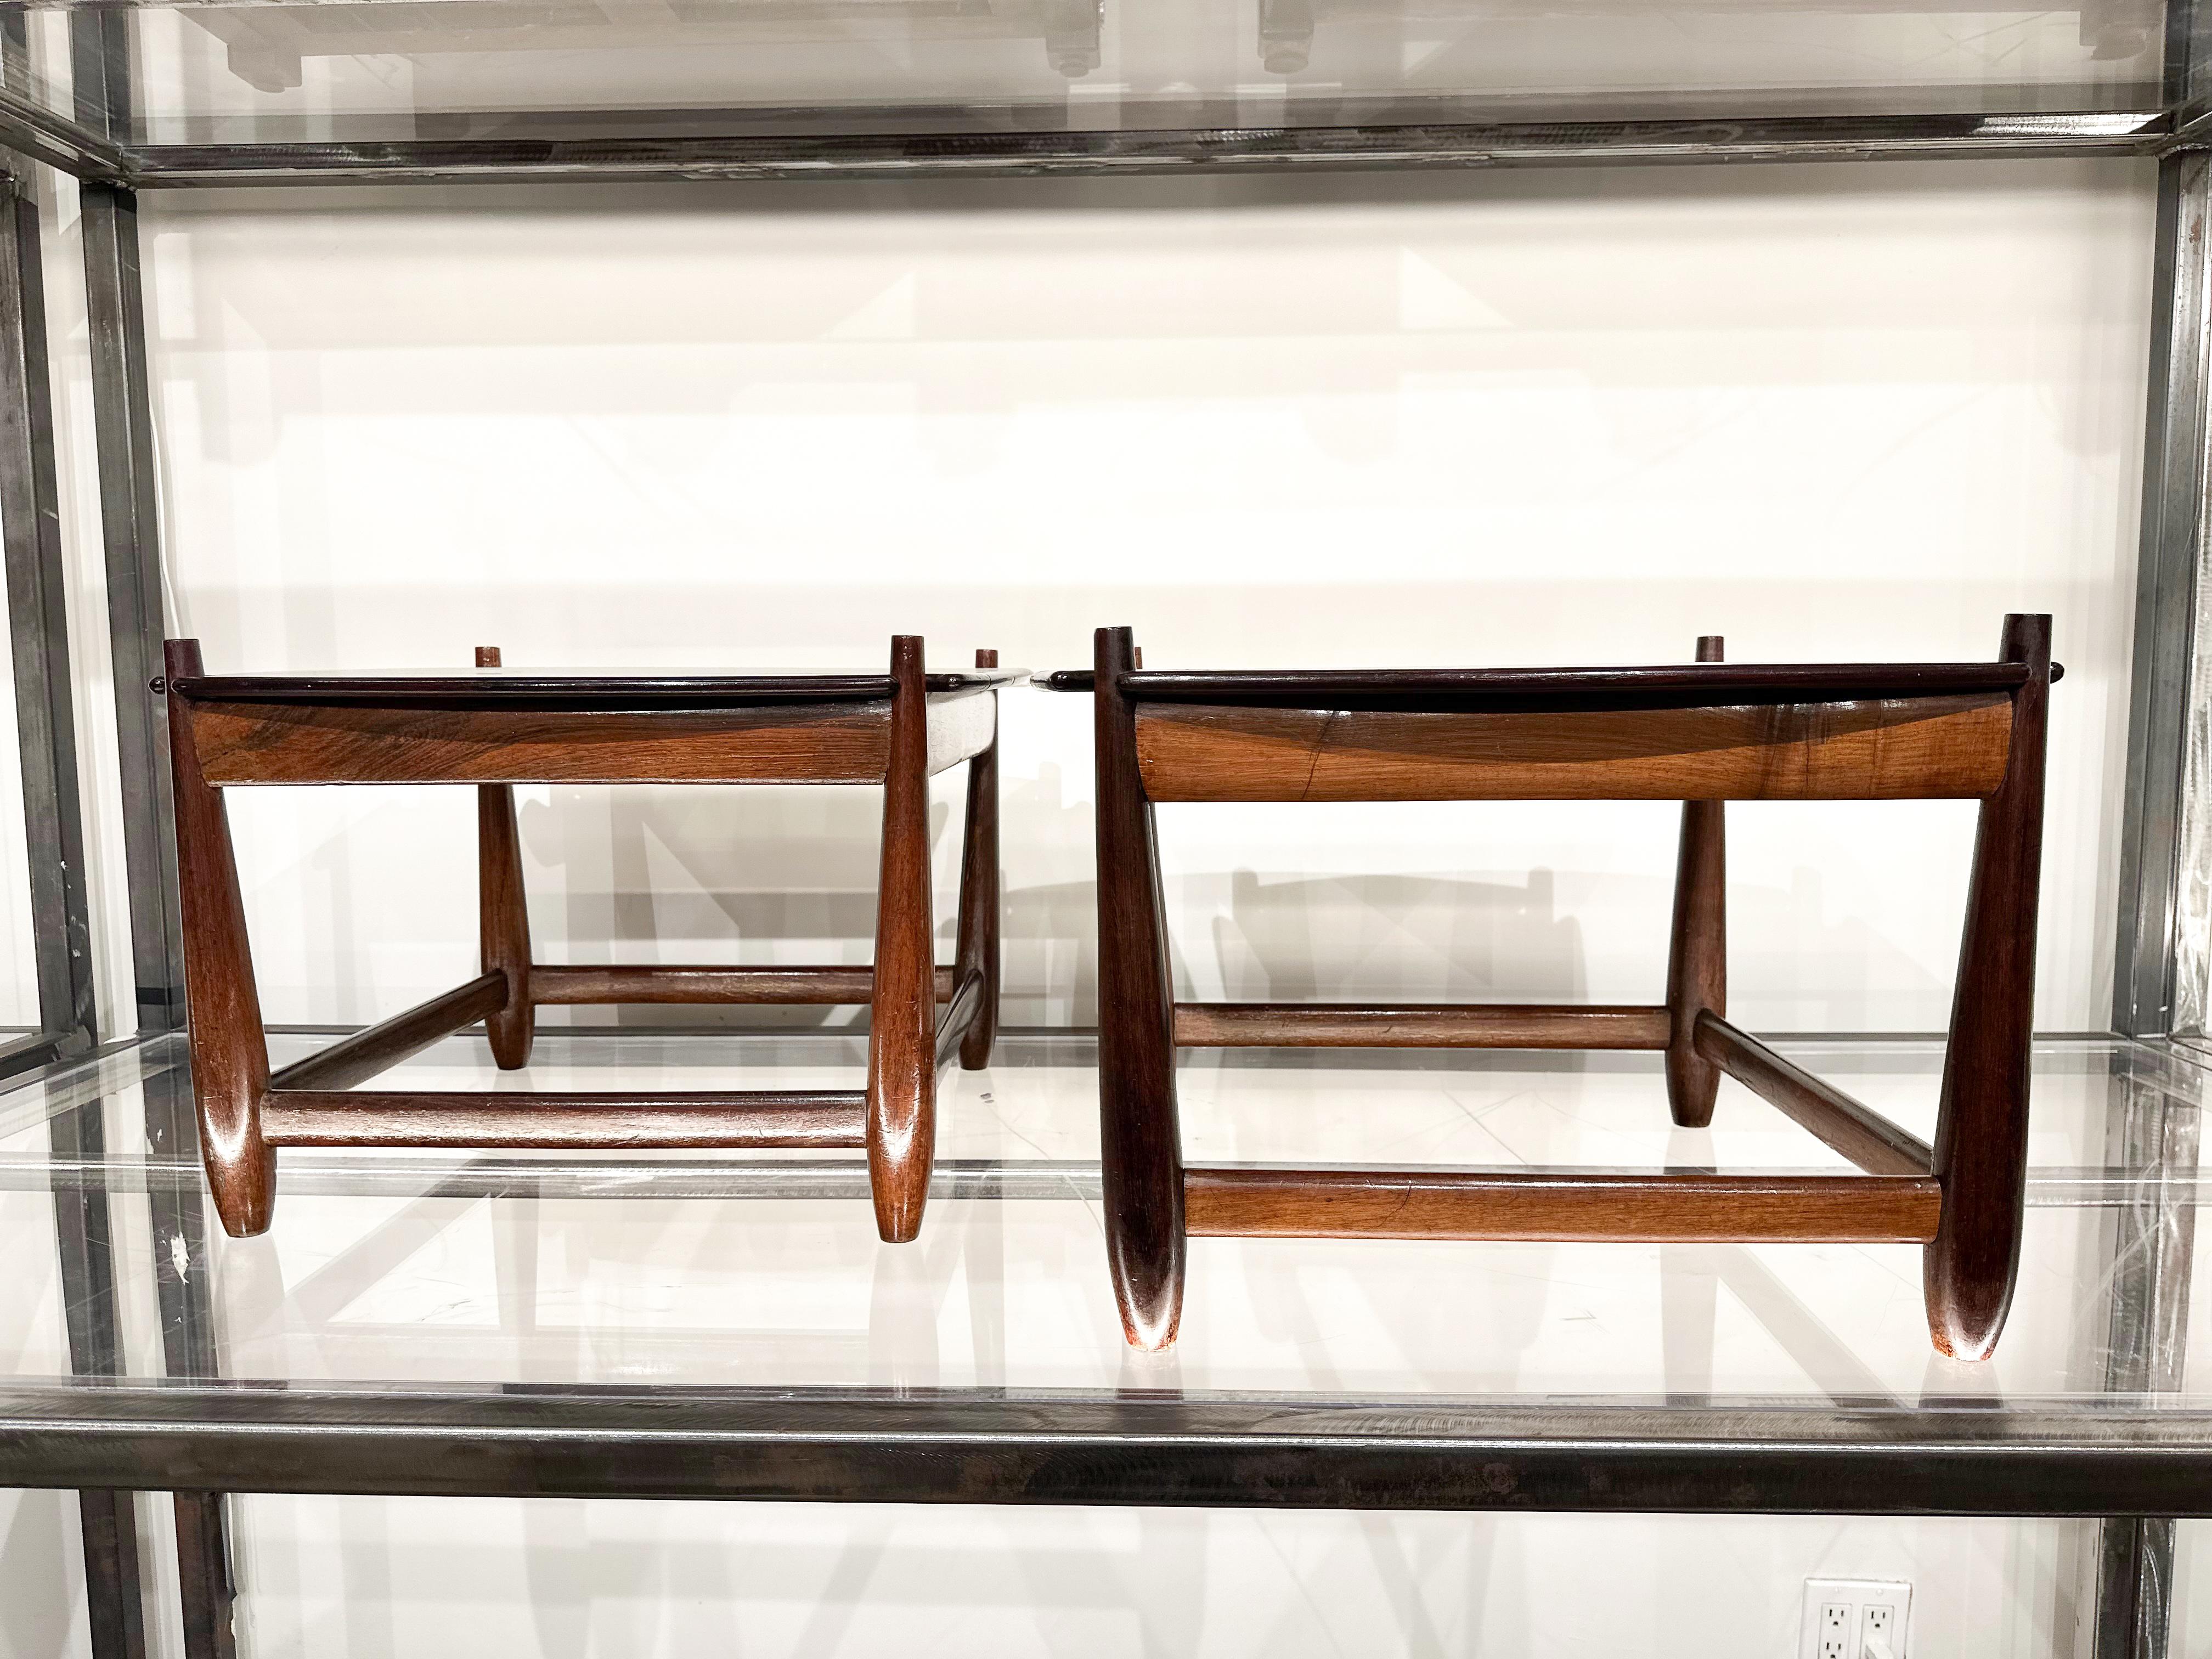 Brazilian Modern “Arimelo” Side Tables in Hardwood, Sergio Rodrigues, 1958   In Good Condition For Sale In New York, NY